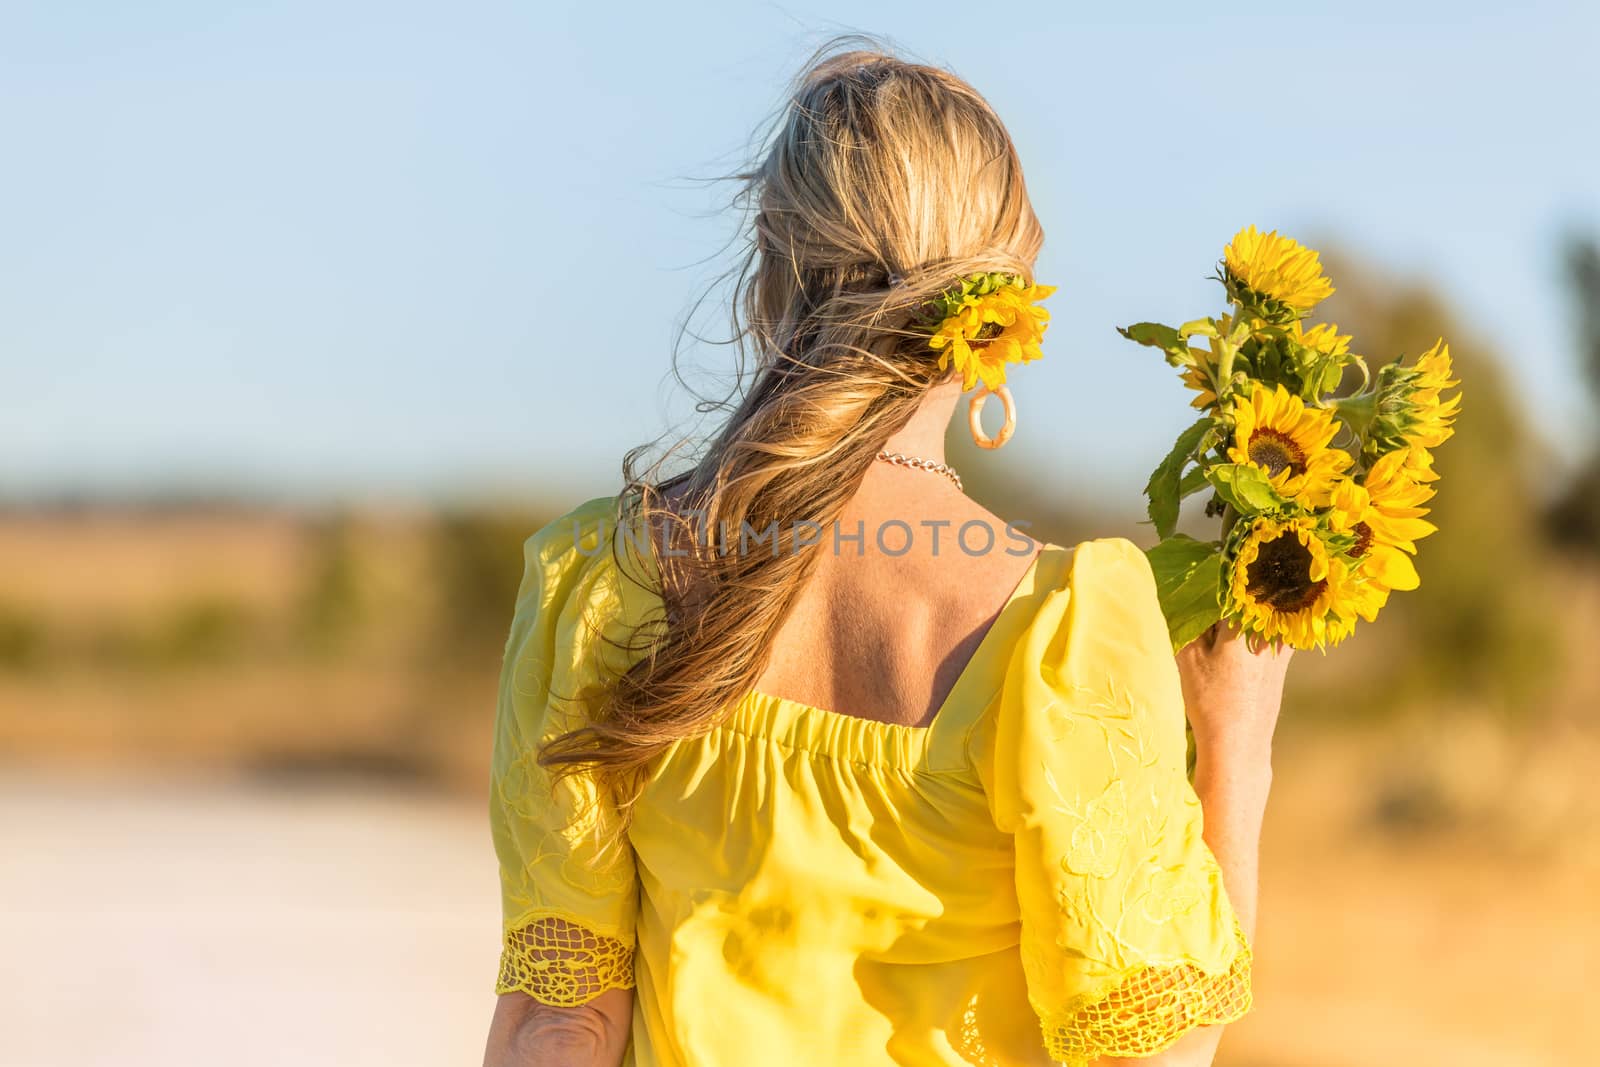 Female in a rural setting holds a bunch of sunflowers.  She has windblown hair with a sunflower adorned